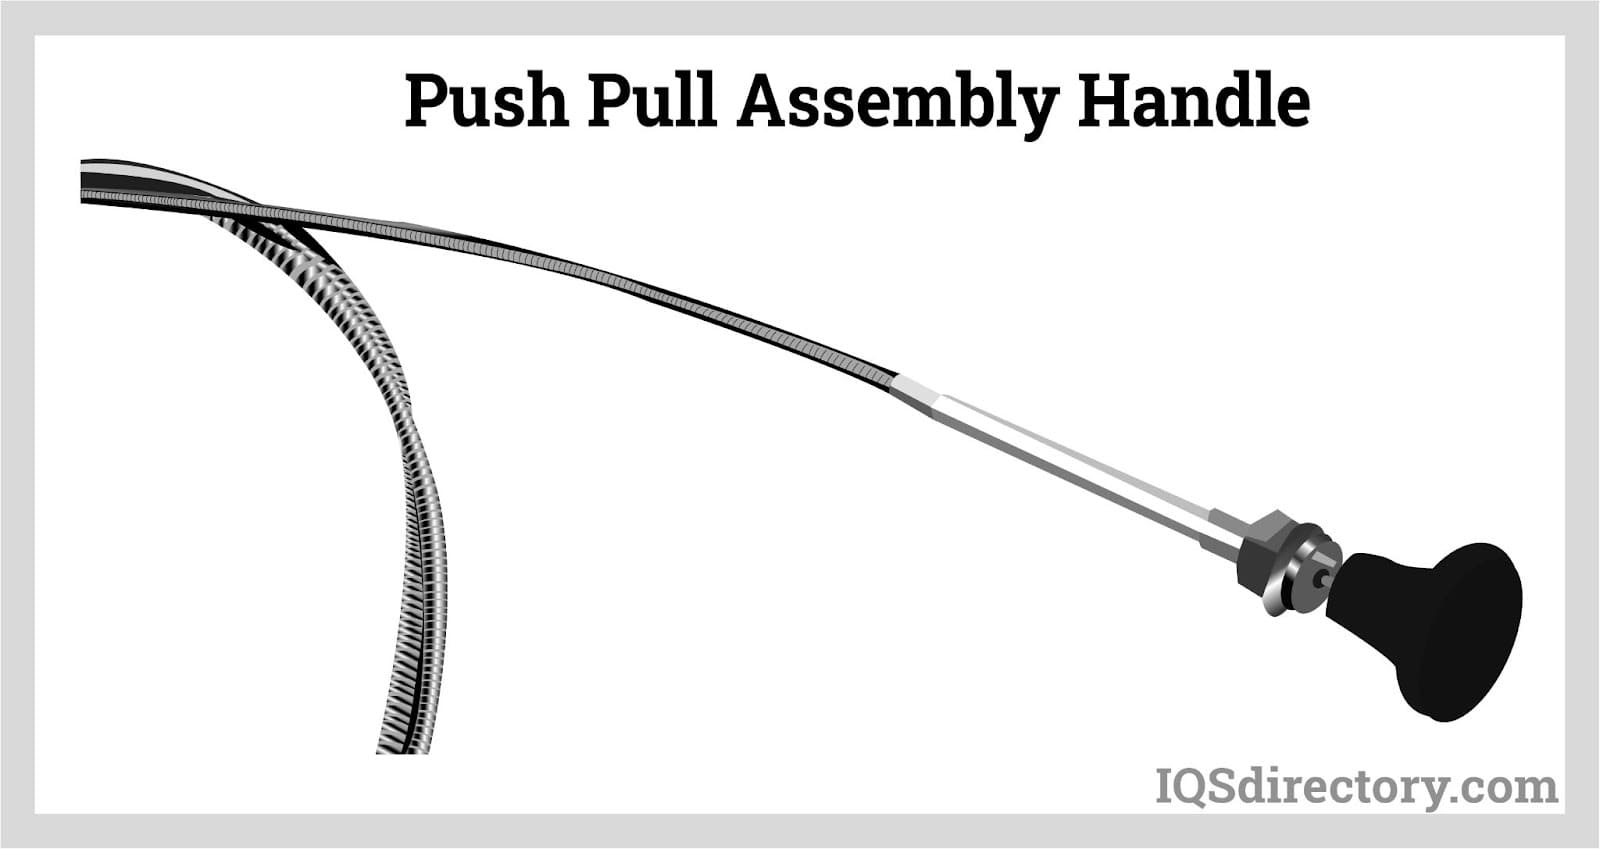 Push Pull Assembly Handle